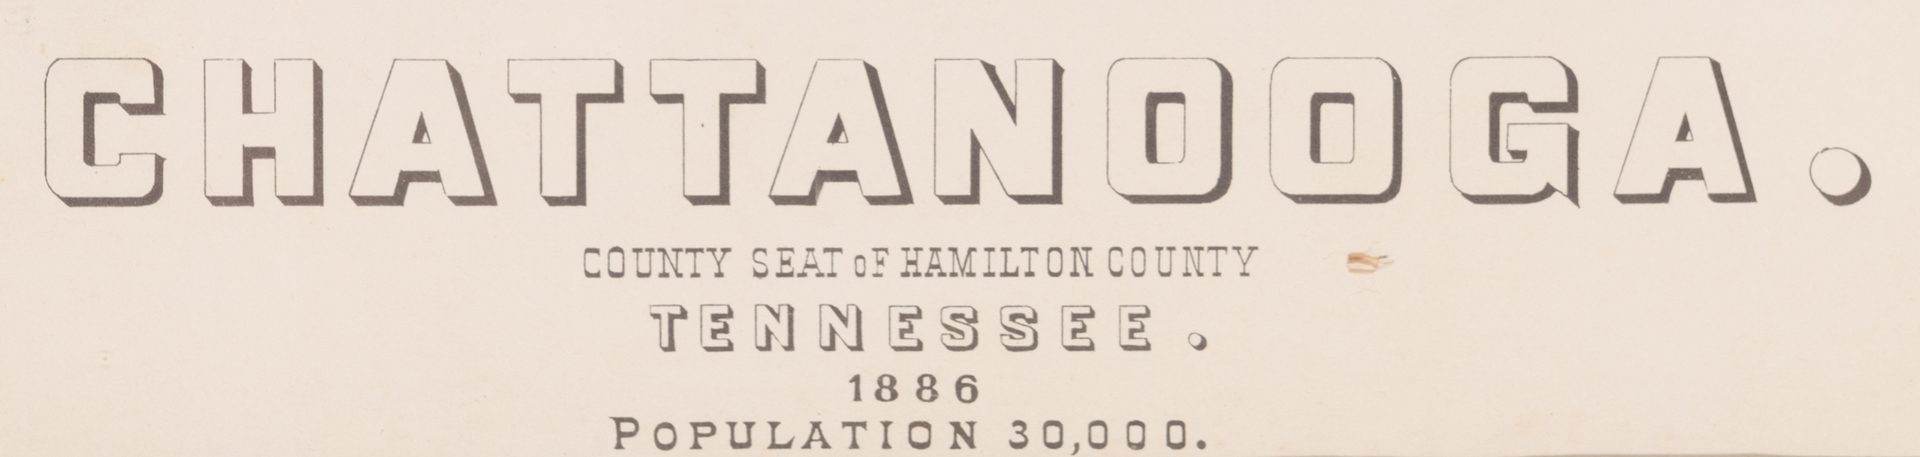 Lot 752: Chattanooga Map, 1887, Wellge